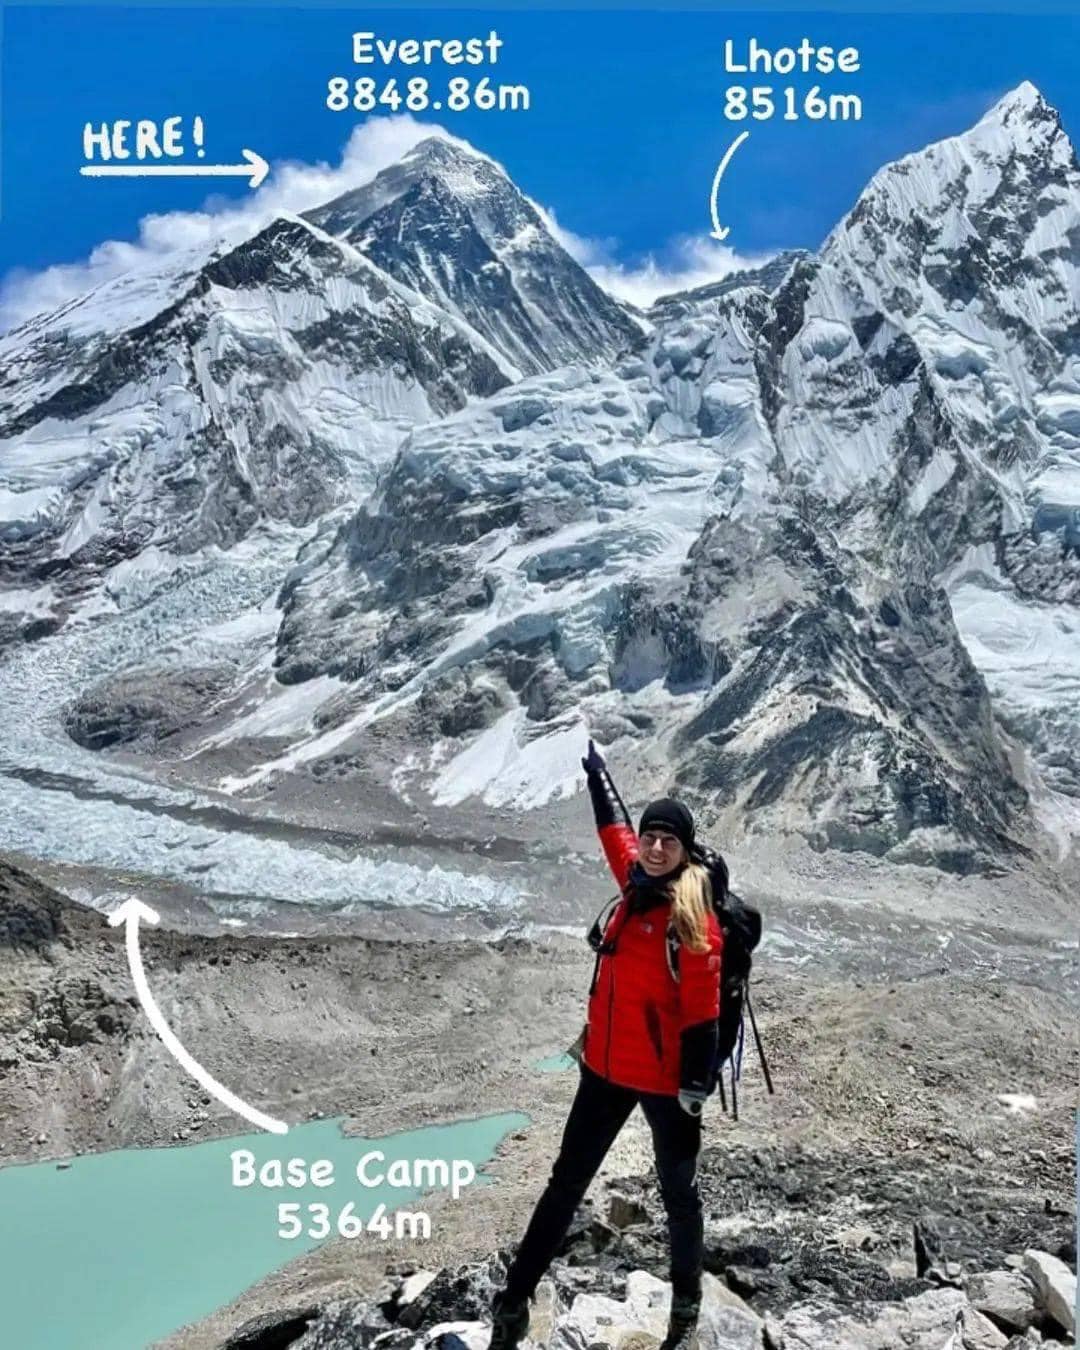 How To Prepare For The Everest Base Camp Trek?